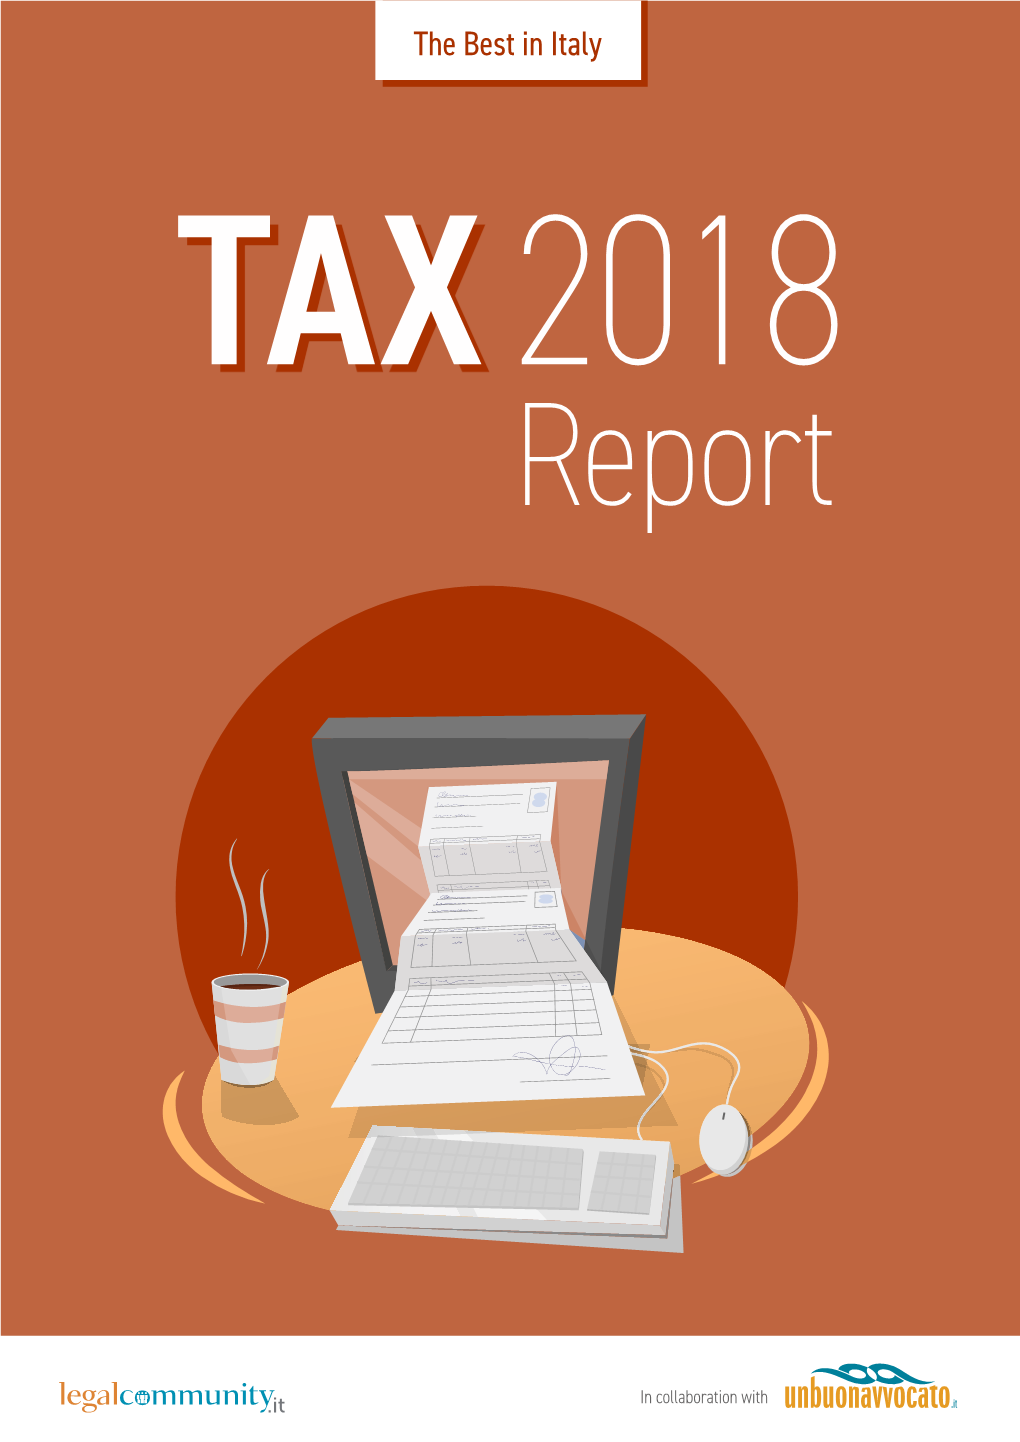 The Best in Italy TAX 2018 Report